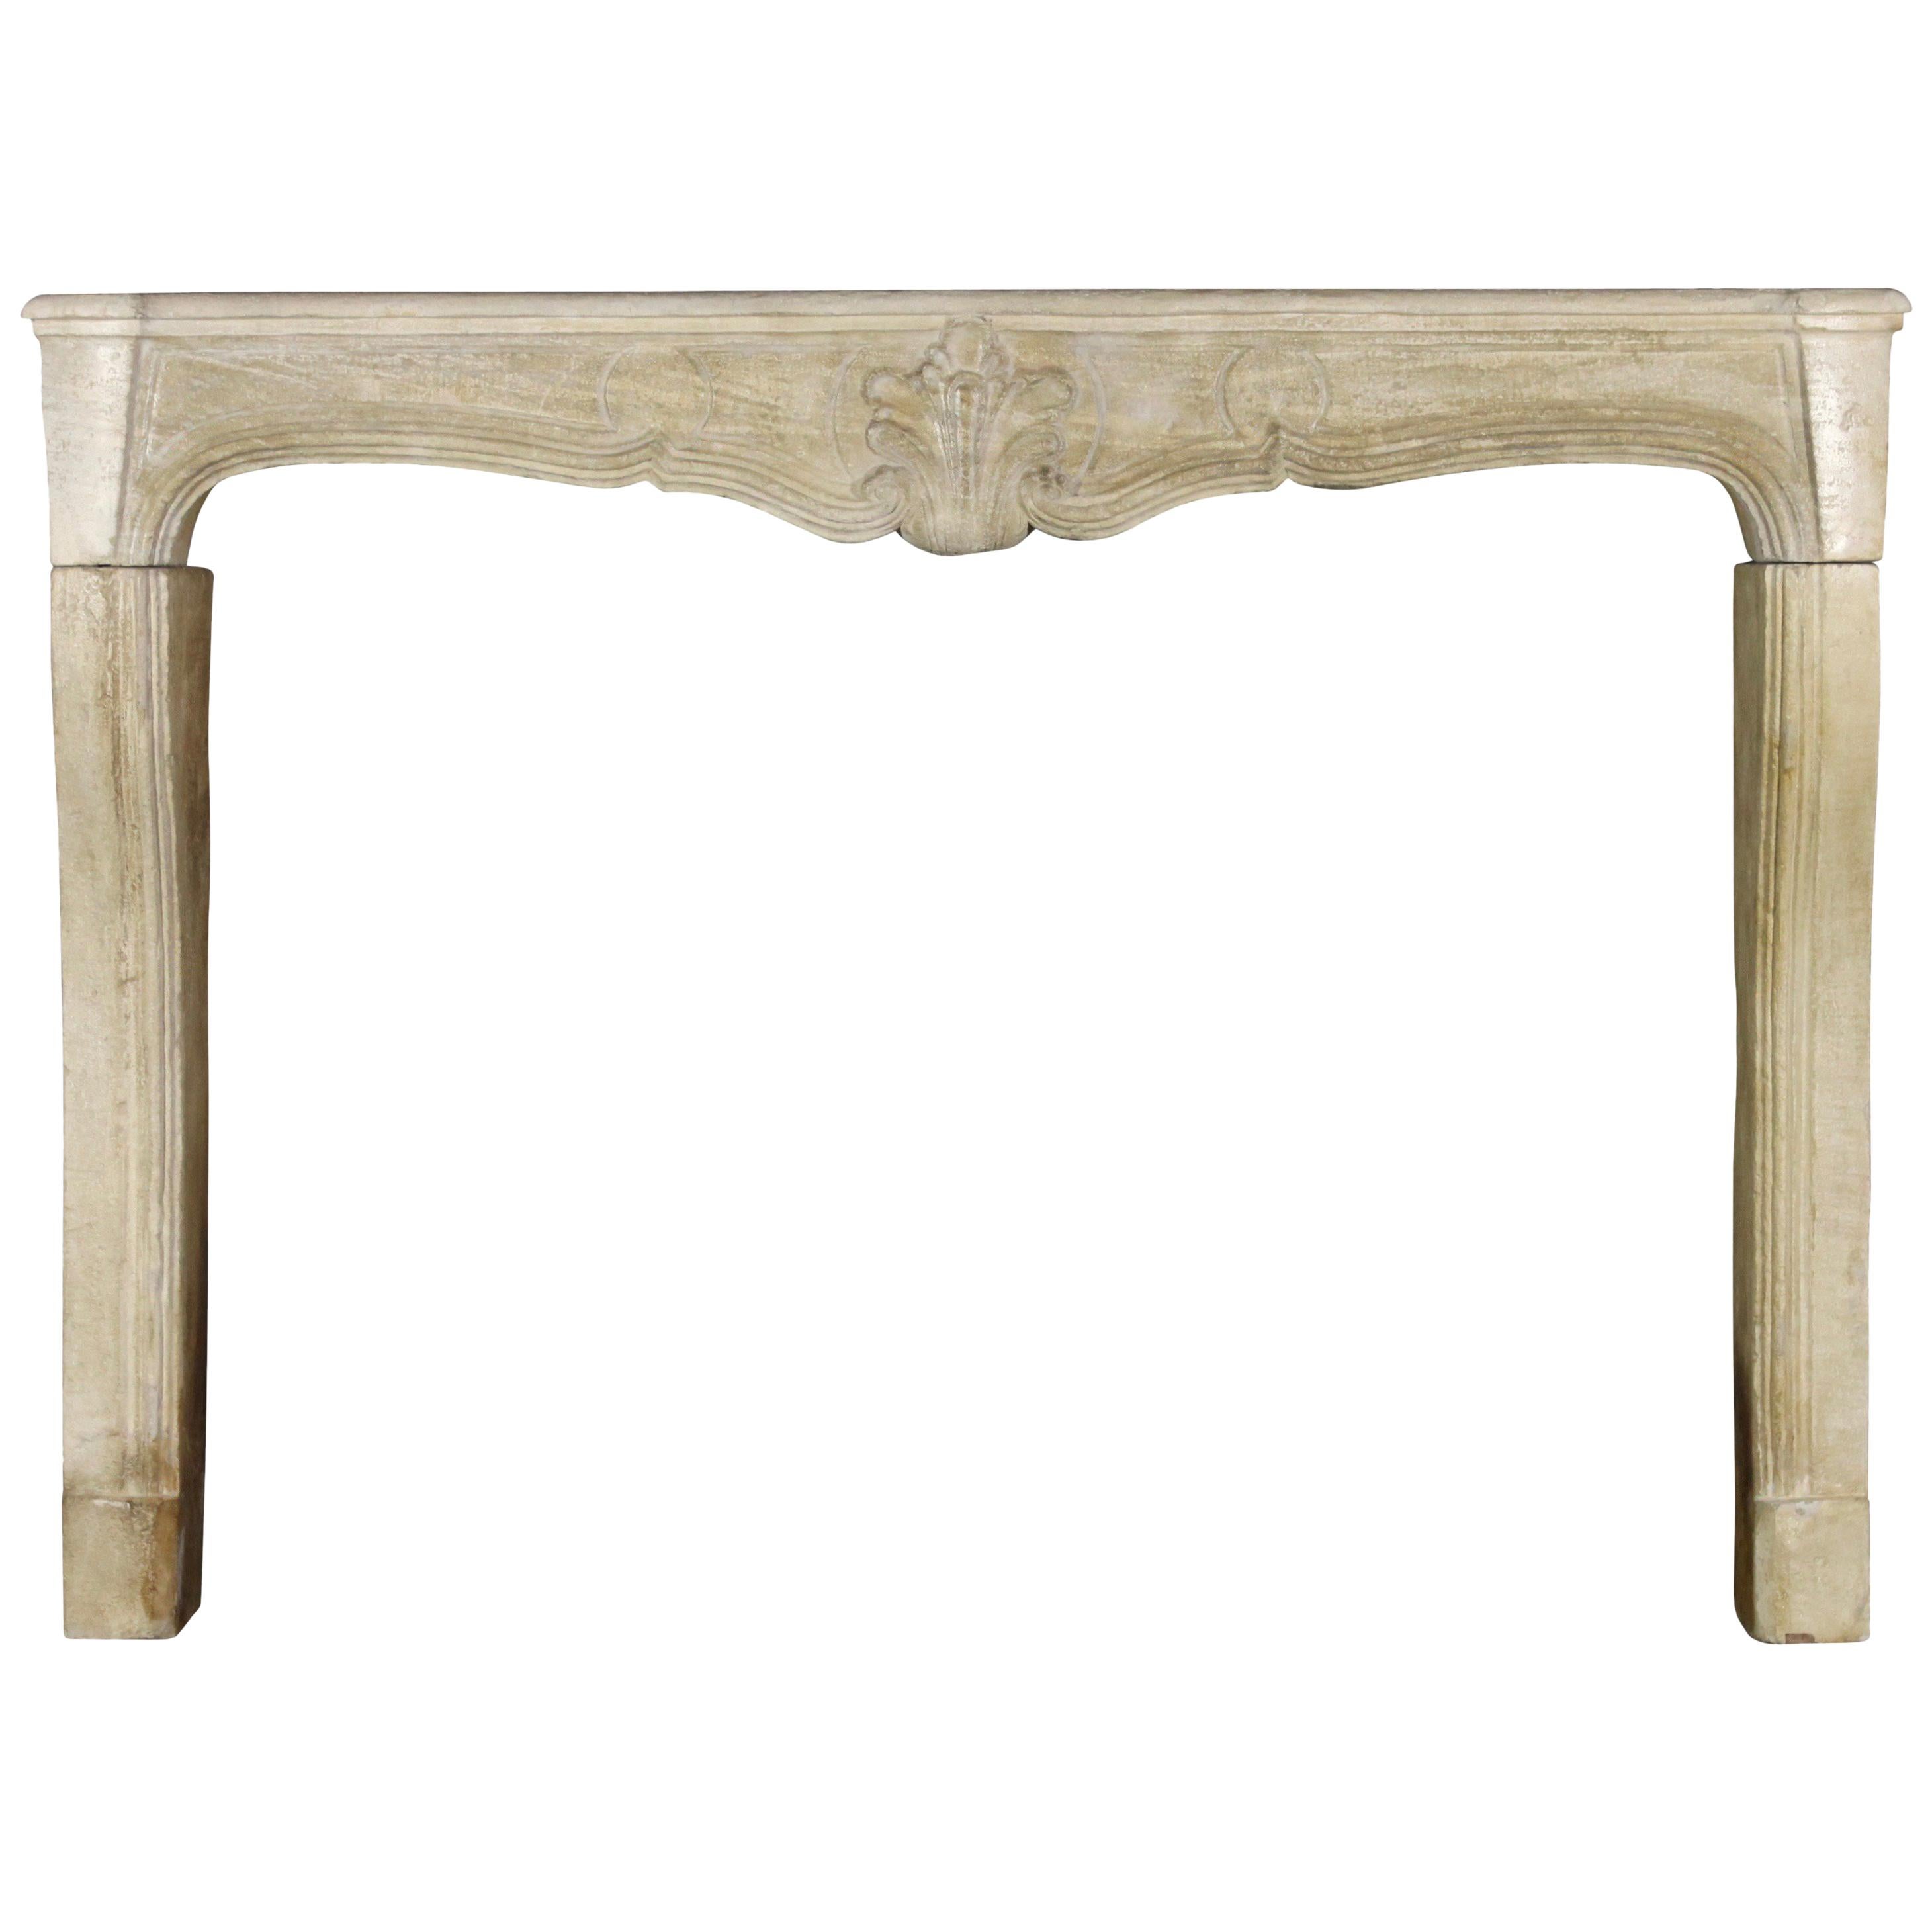 18th Century French Country Antique Fireplace Surround in Limestone